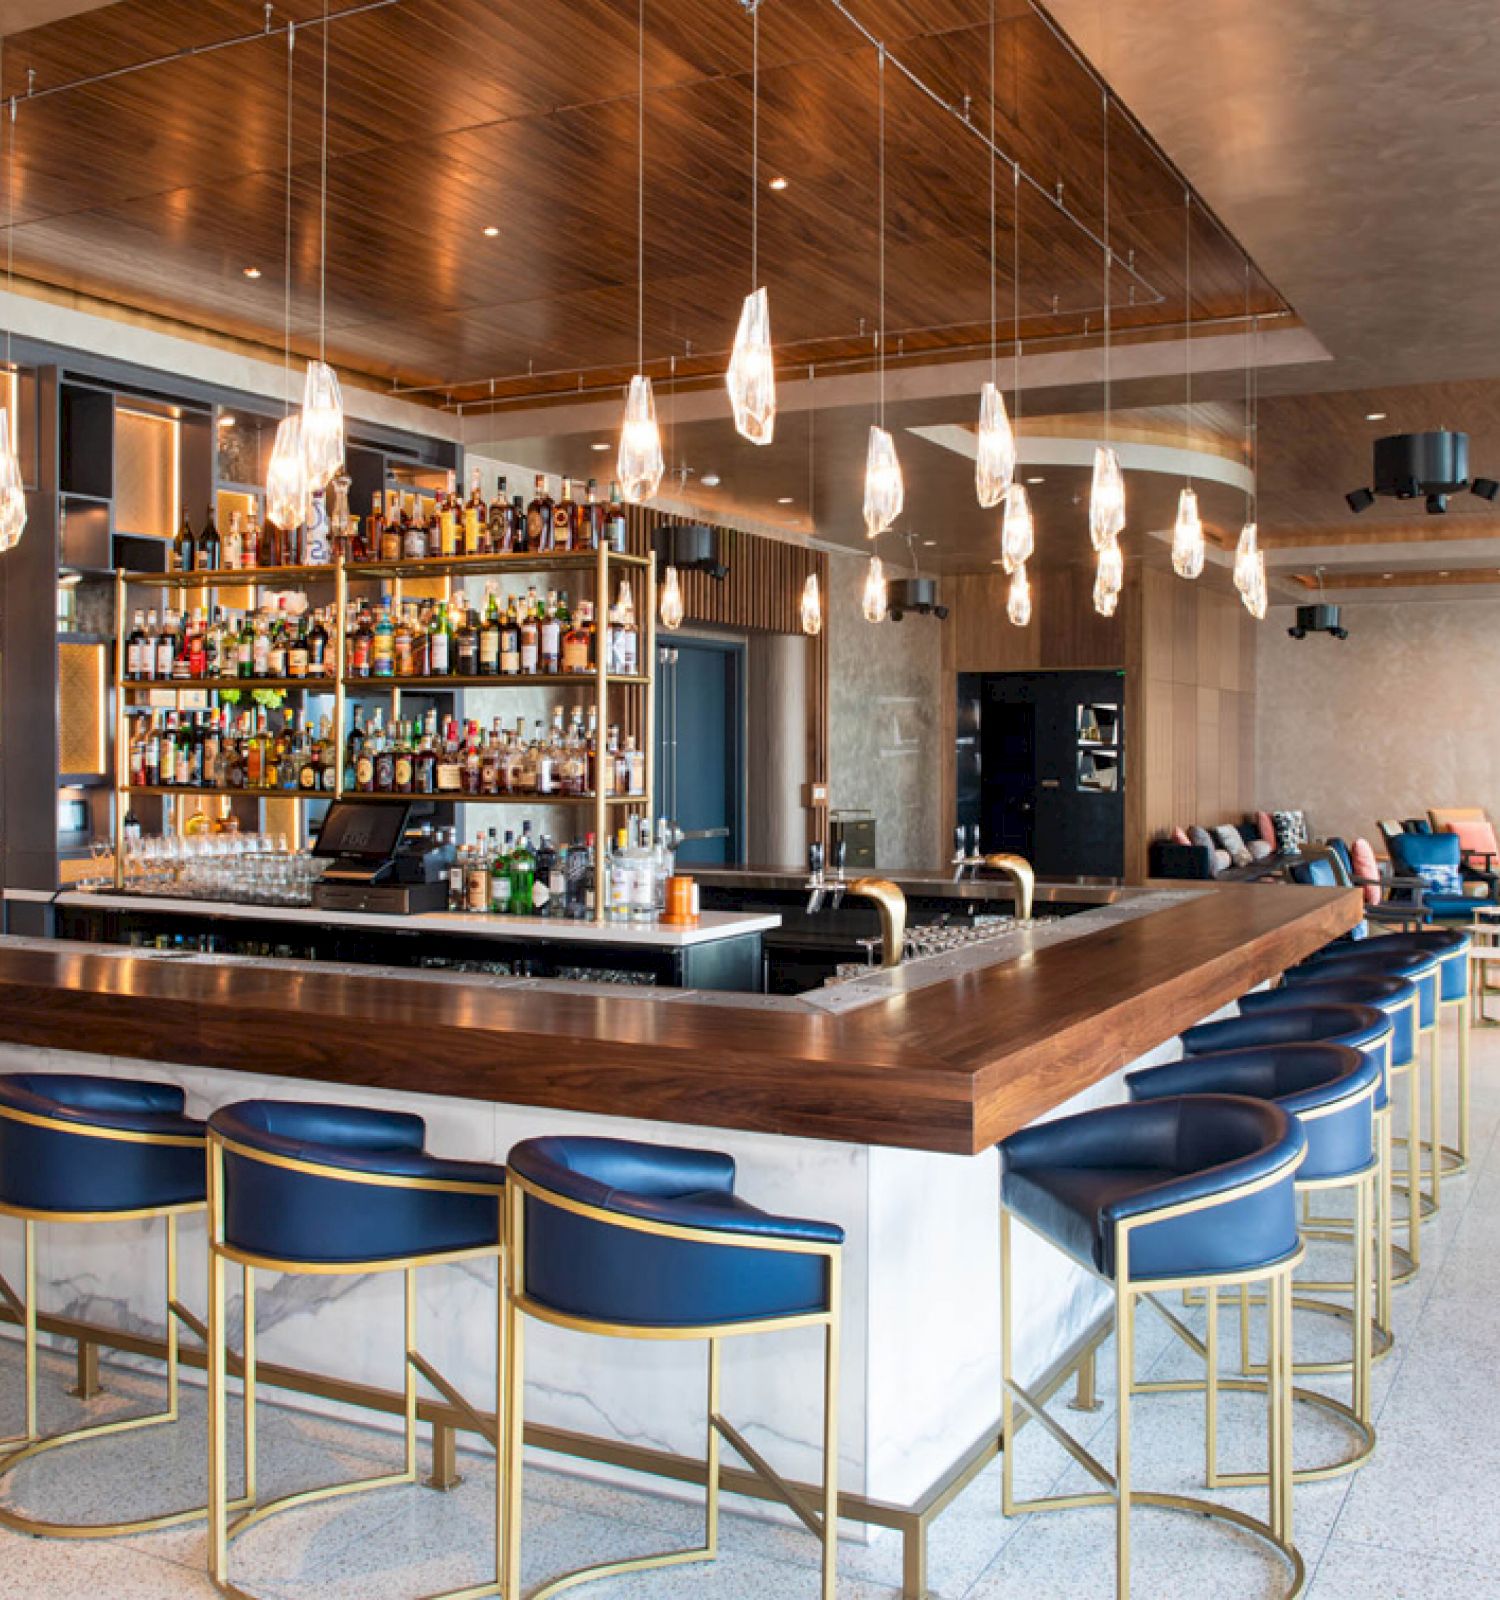 A modern bar area with a wooden countertop, blue and gold bar stools, hanging lights, and a well-stocked liquor shelf, alongside seating areas.